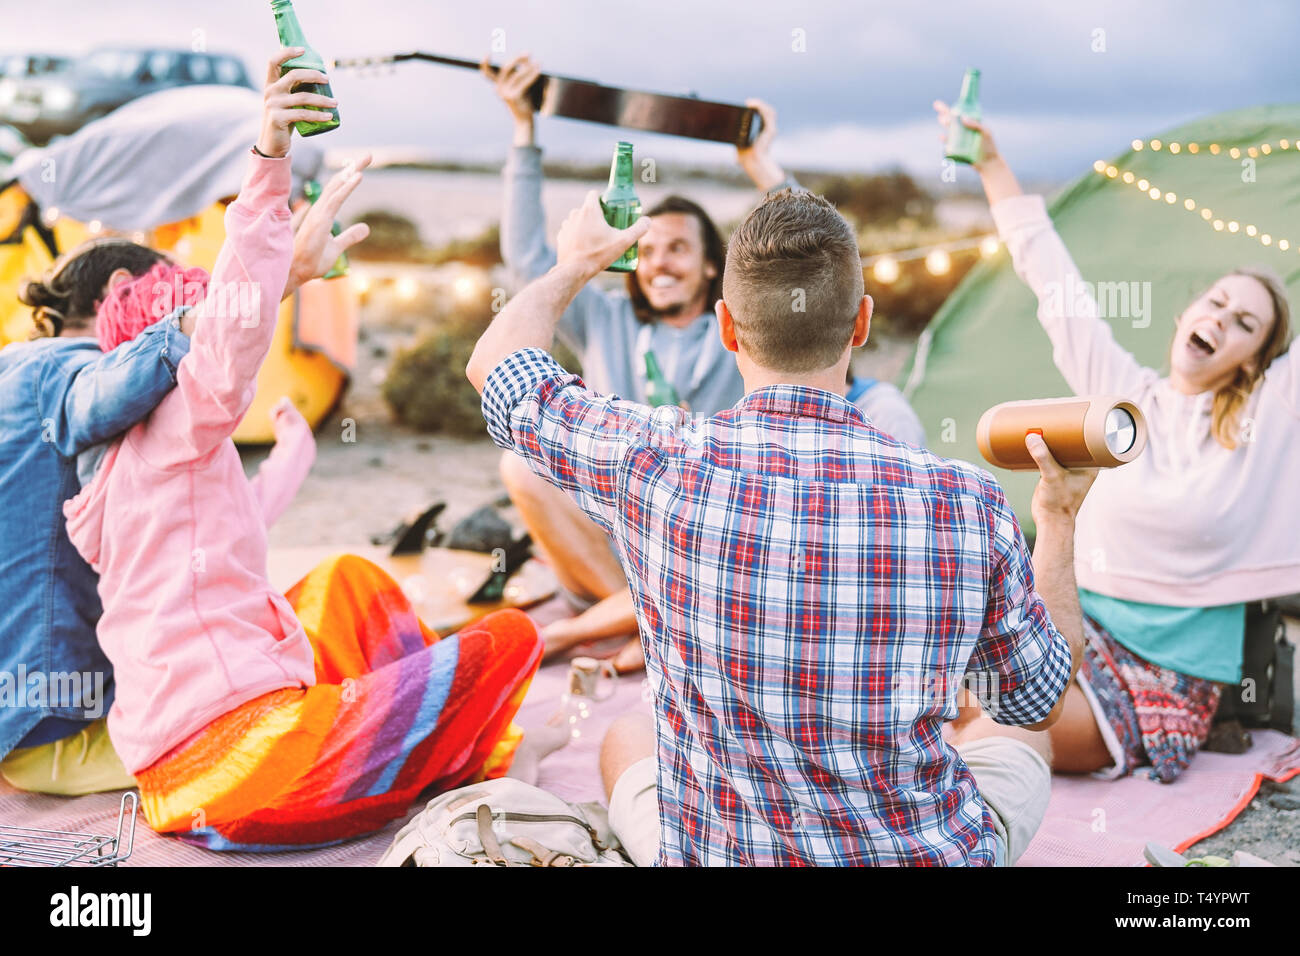 Happy friends making party drinking beers and playing music while camping with tents outdoor - Young people having fun and laughing together Stock Photo